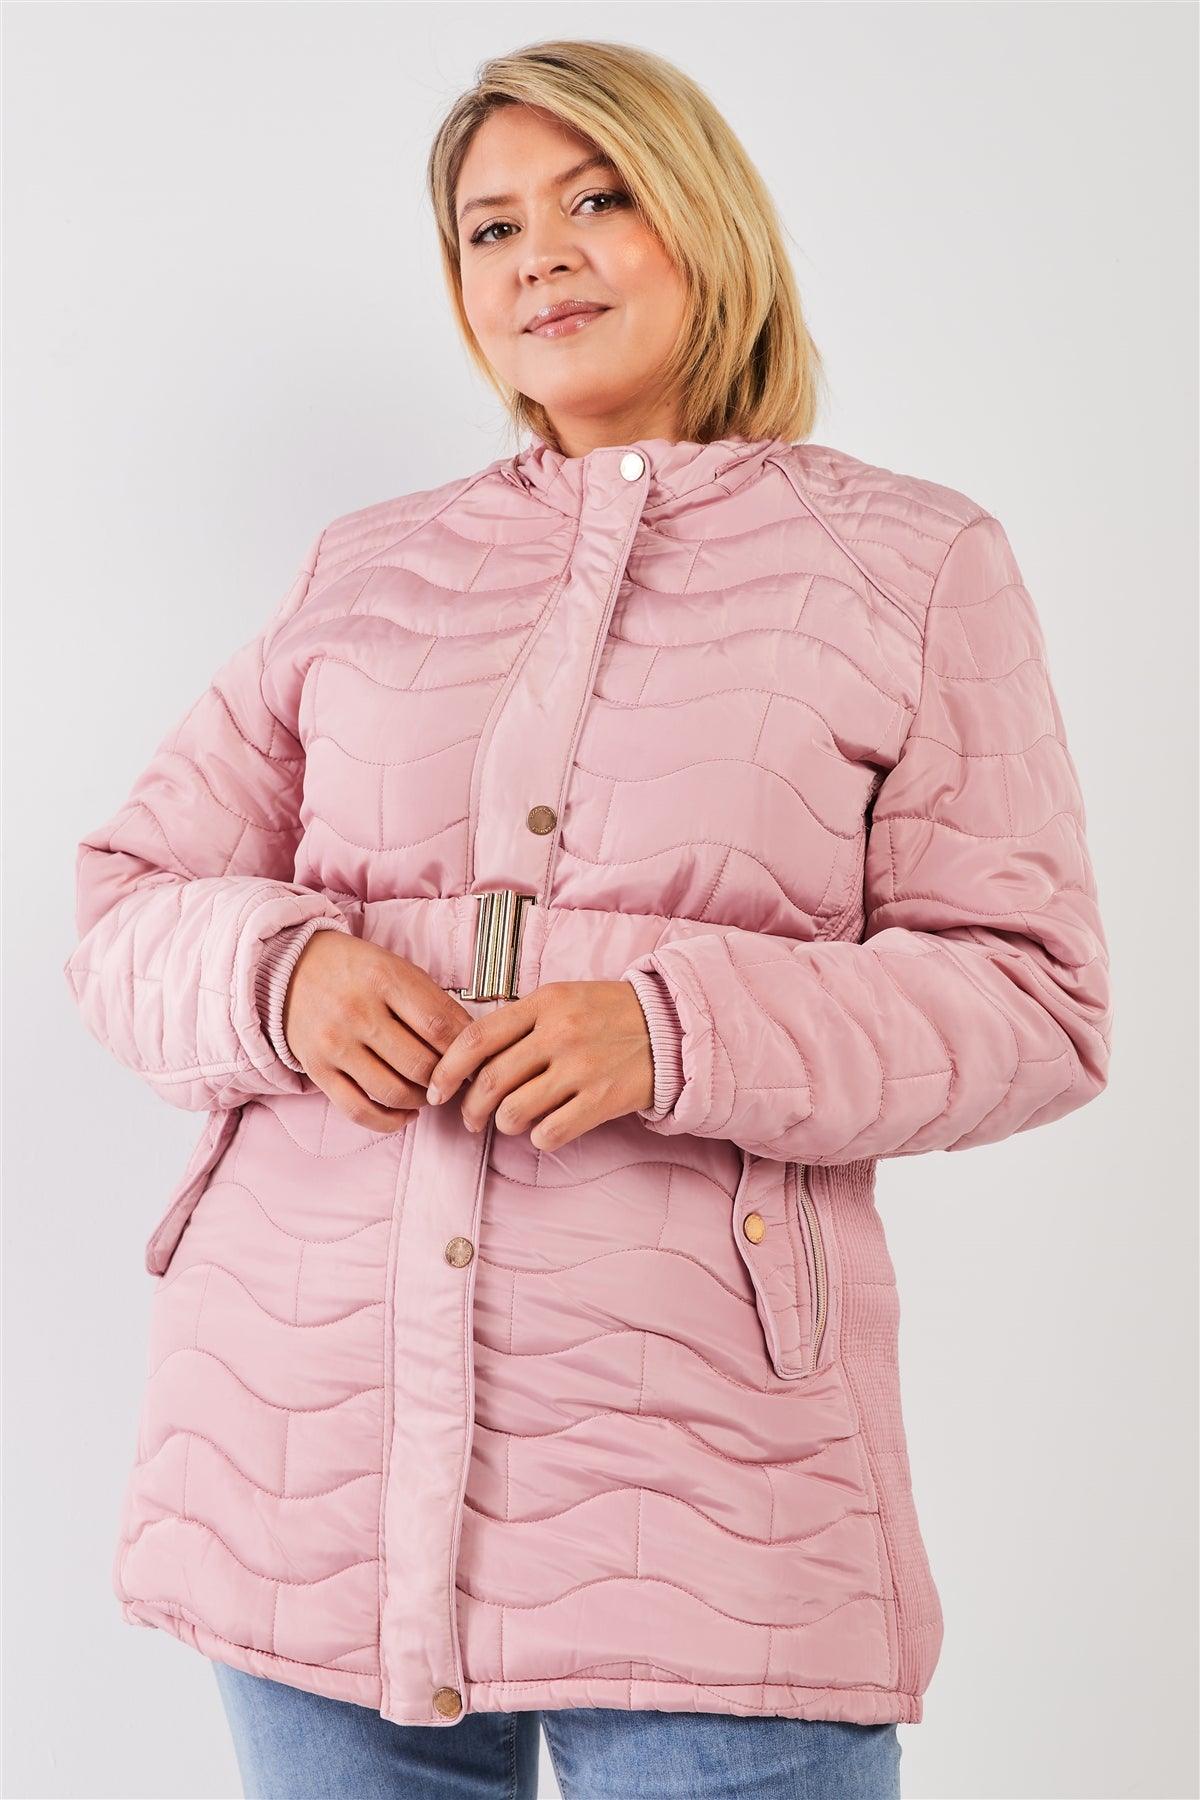 Junior Plus Pink Wavy Brick Quilt Faux Fur Hood Belted Padded Long Puffer Jacket